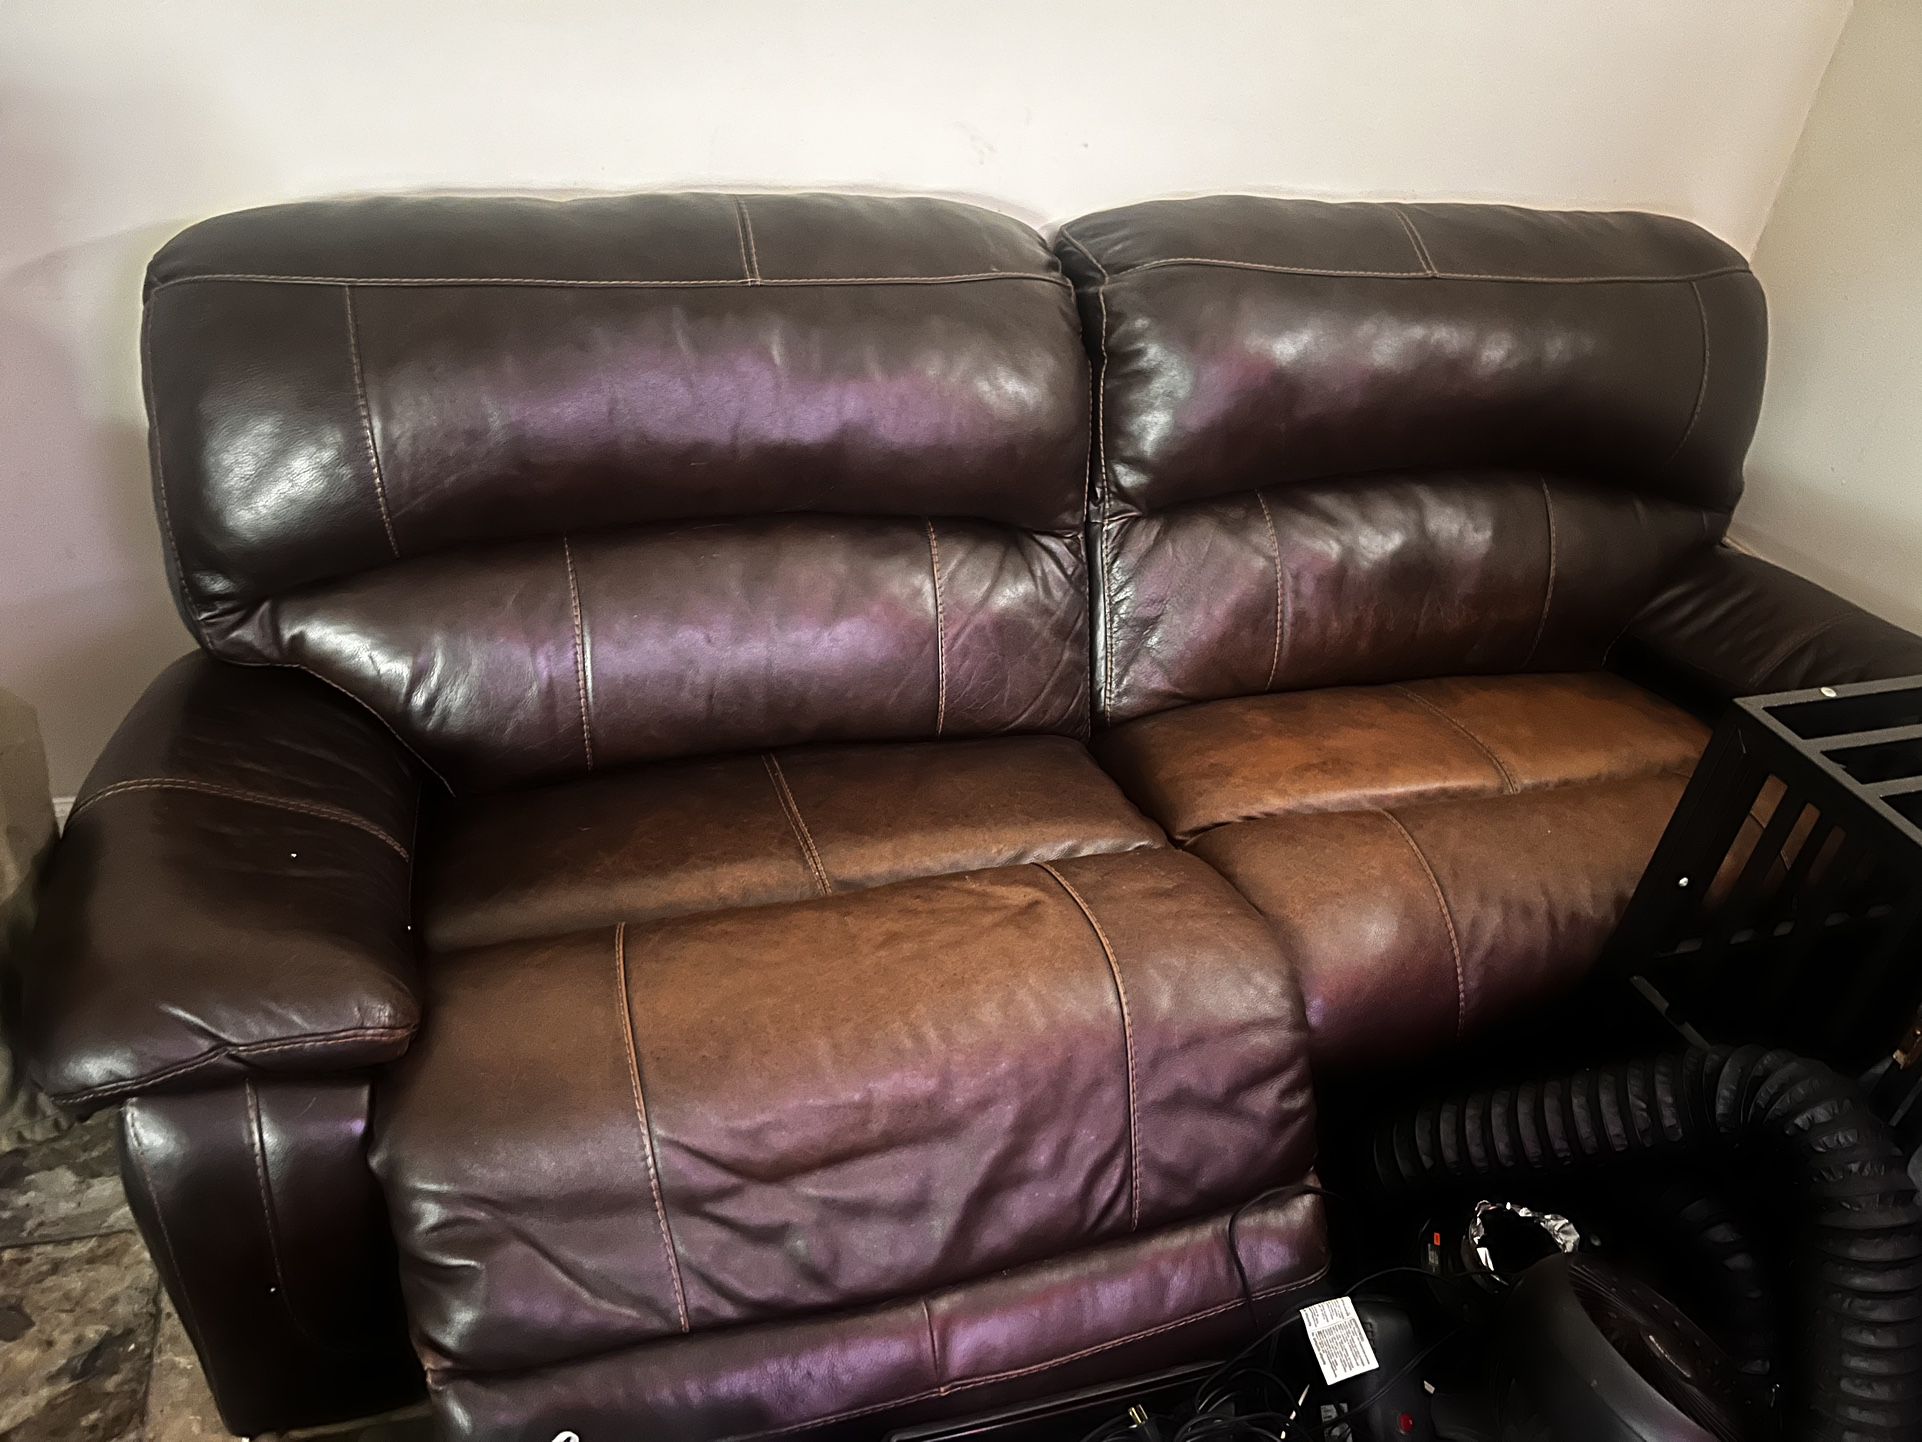 Brown Leather Recliners